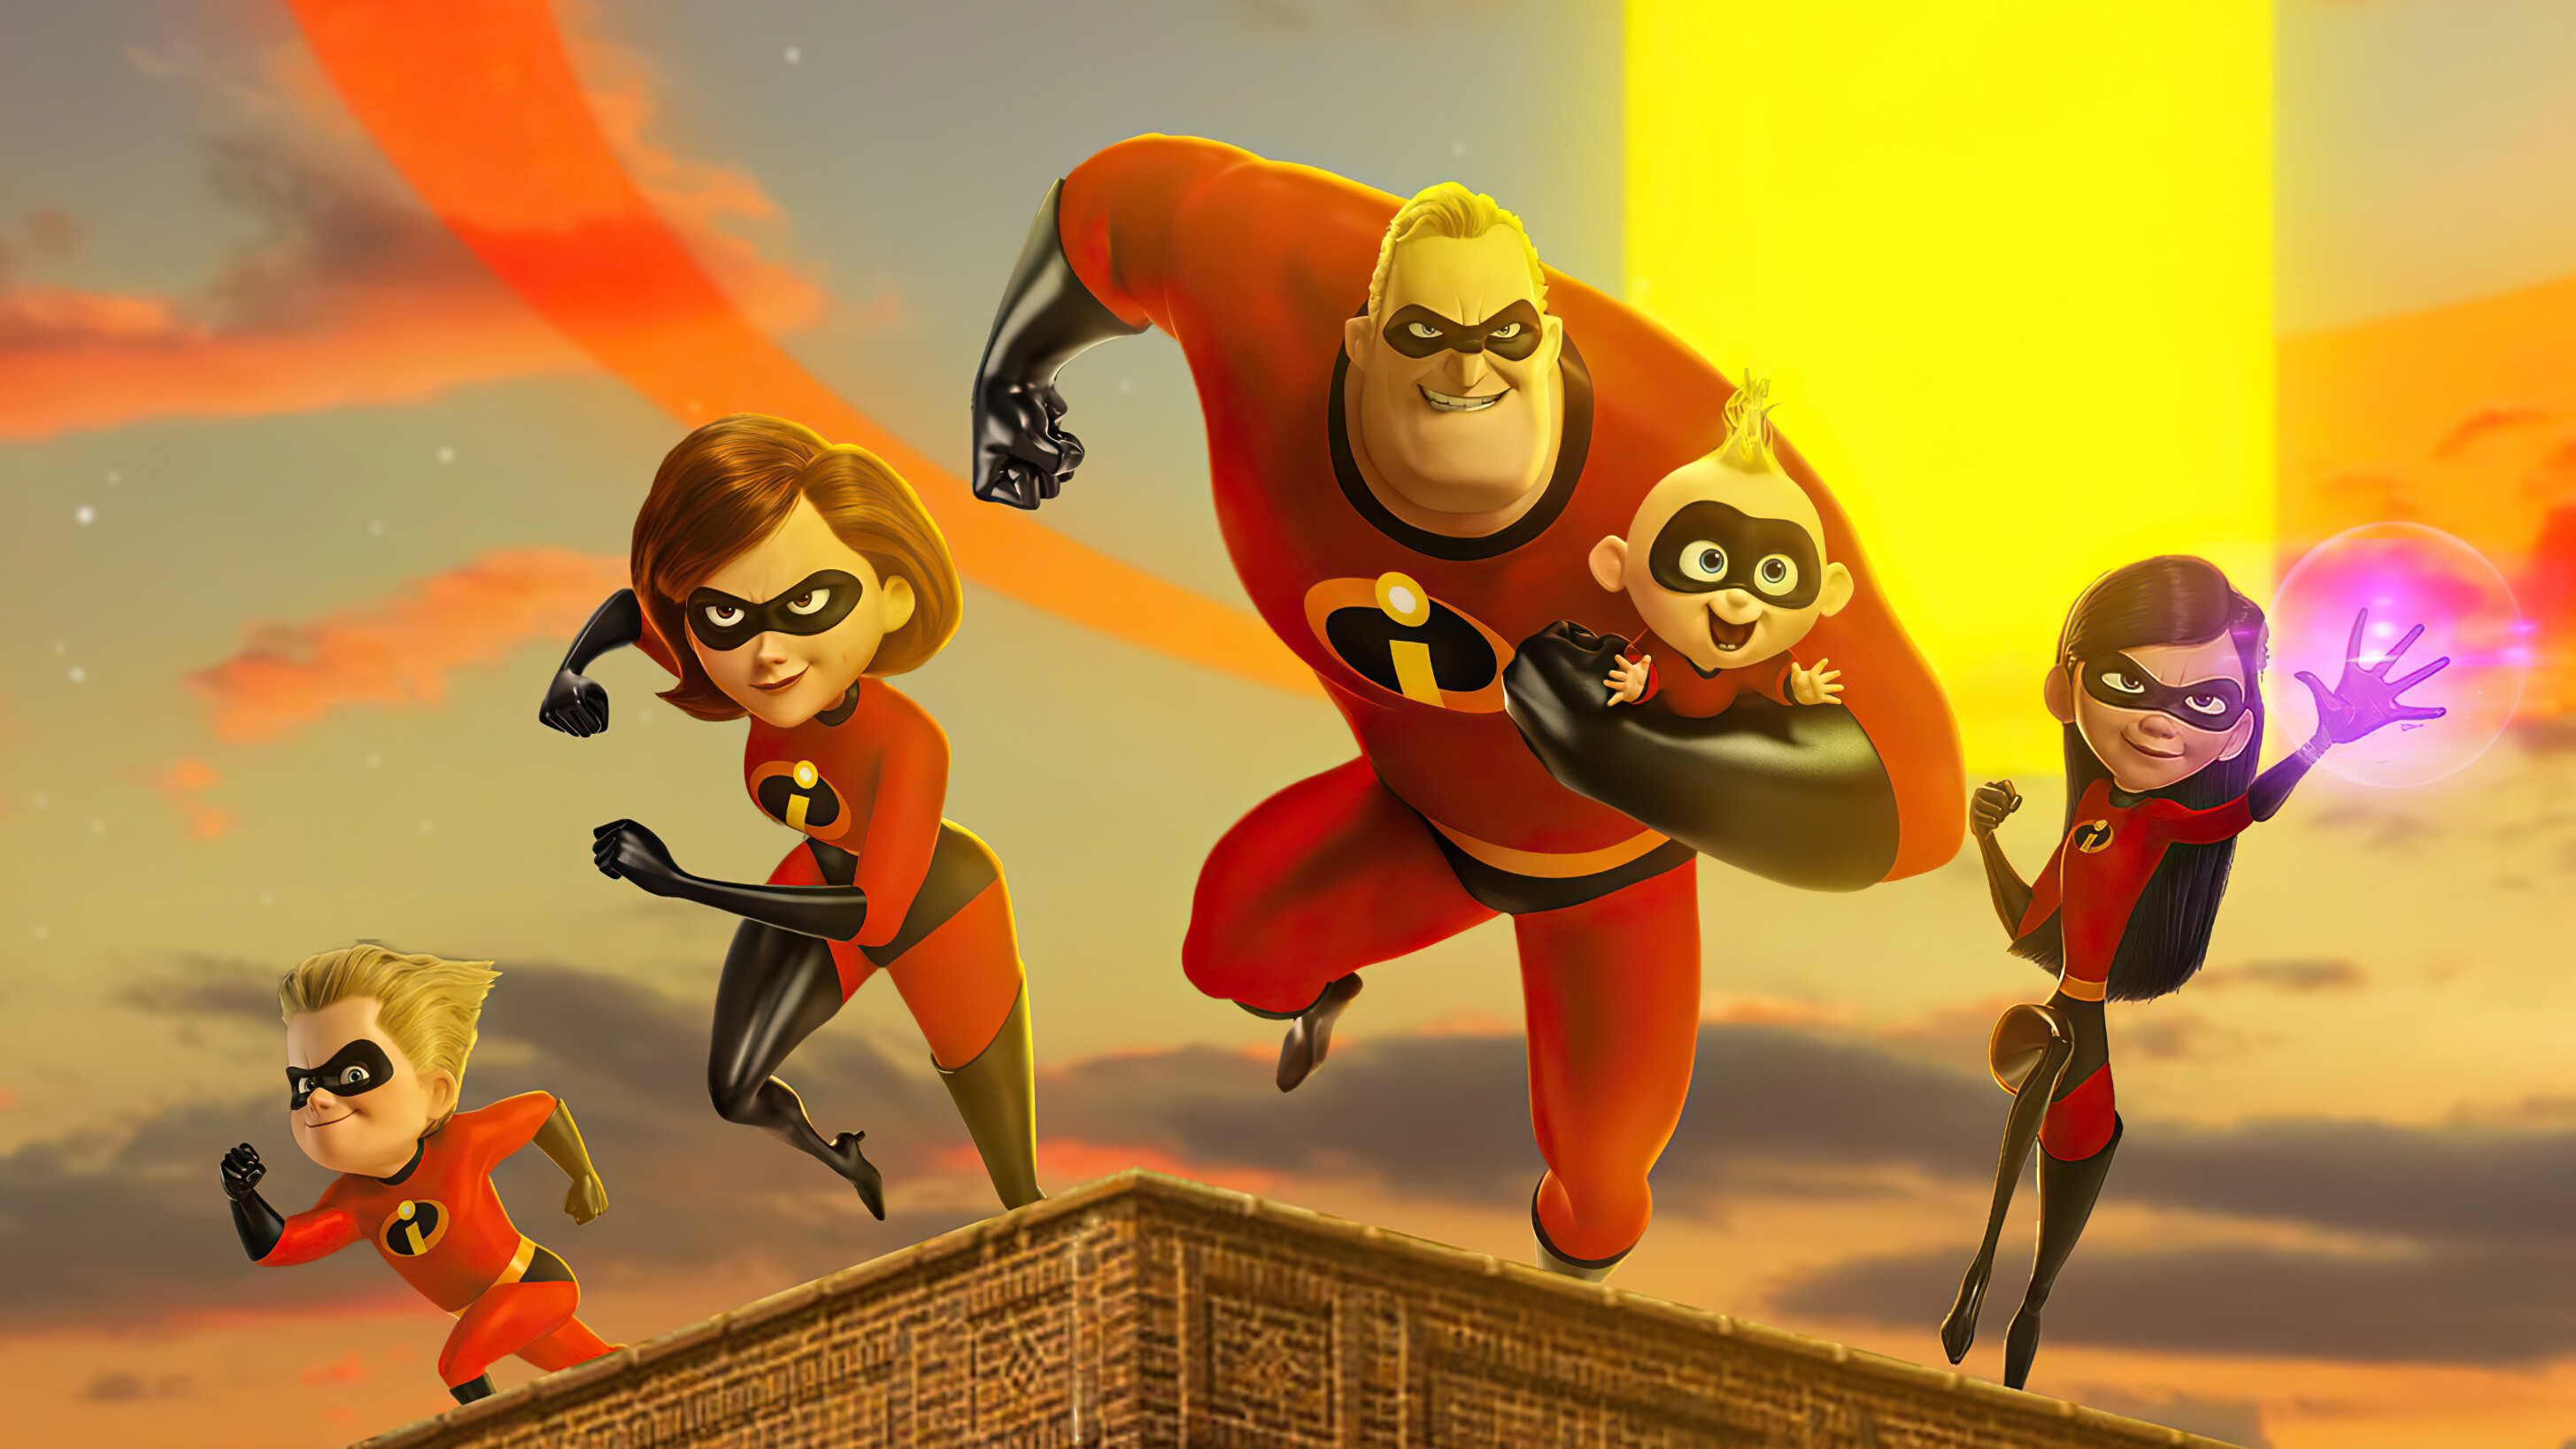 The Incredibles: The voices of Craig T. Nelson, Holly Hunter, Sarah Vowell, Spencer Fox, Jason Lee, Samuel L. Jackson, and Elizabeth Pena. 2910x1640 HD Background.